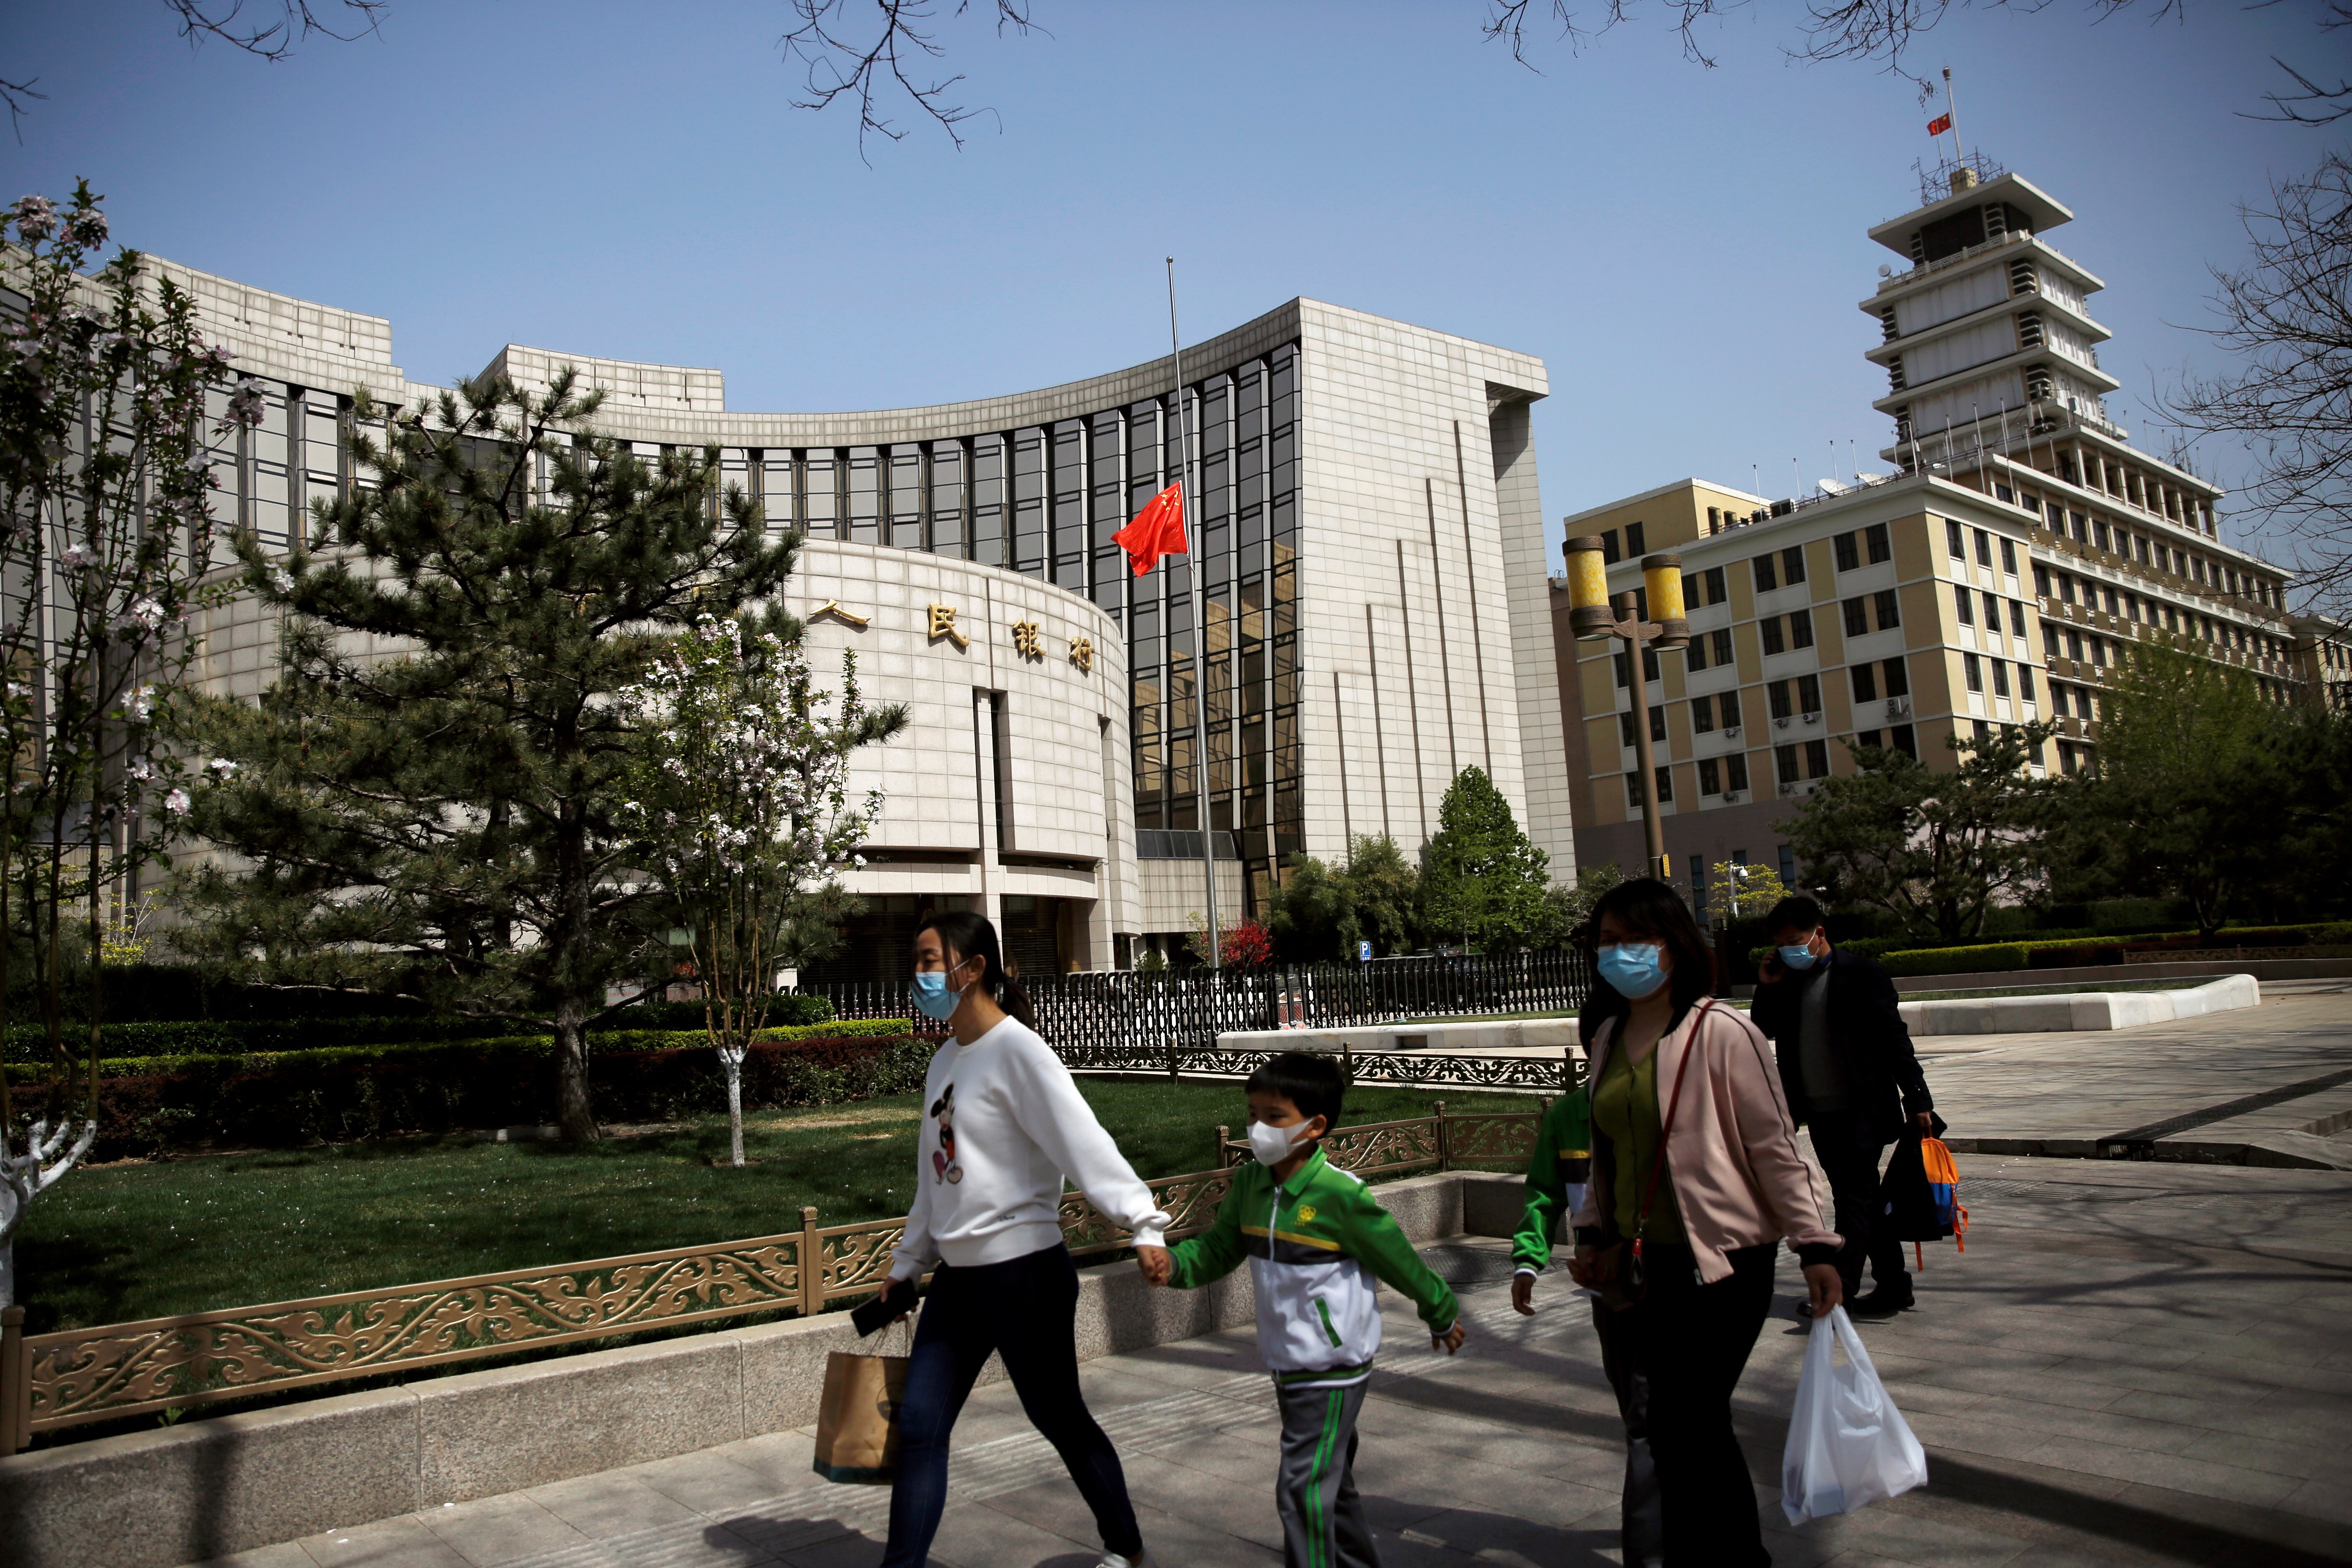 People wearing face masks walk past the headquarters of the People's Bank of China on April 4. The Chinese central bank’s conservative approach in its response to the economic impact of the Covid-19 pandemic could make it a darling for bond investors seeking higher yields. Photo: Reuters